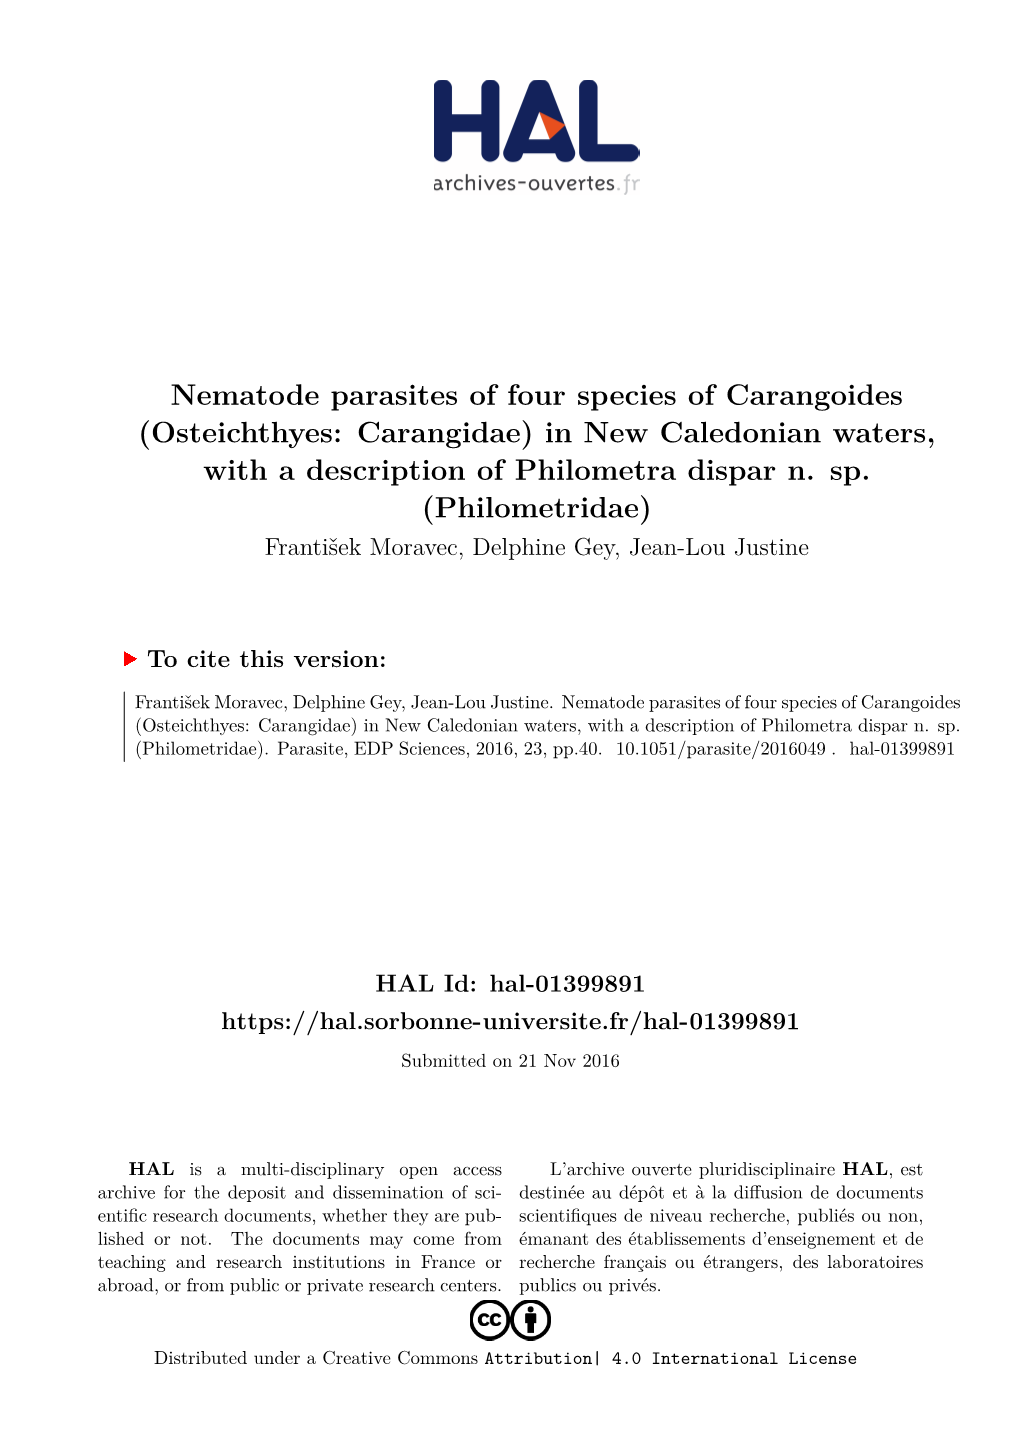 Nematode Parasites of Four Species of Carangoides (Osteichthyes: Carangidae) in New Caledonian Waters, with a Description of Philometra Dispar N